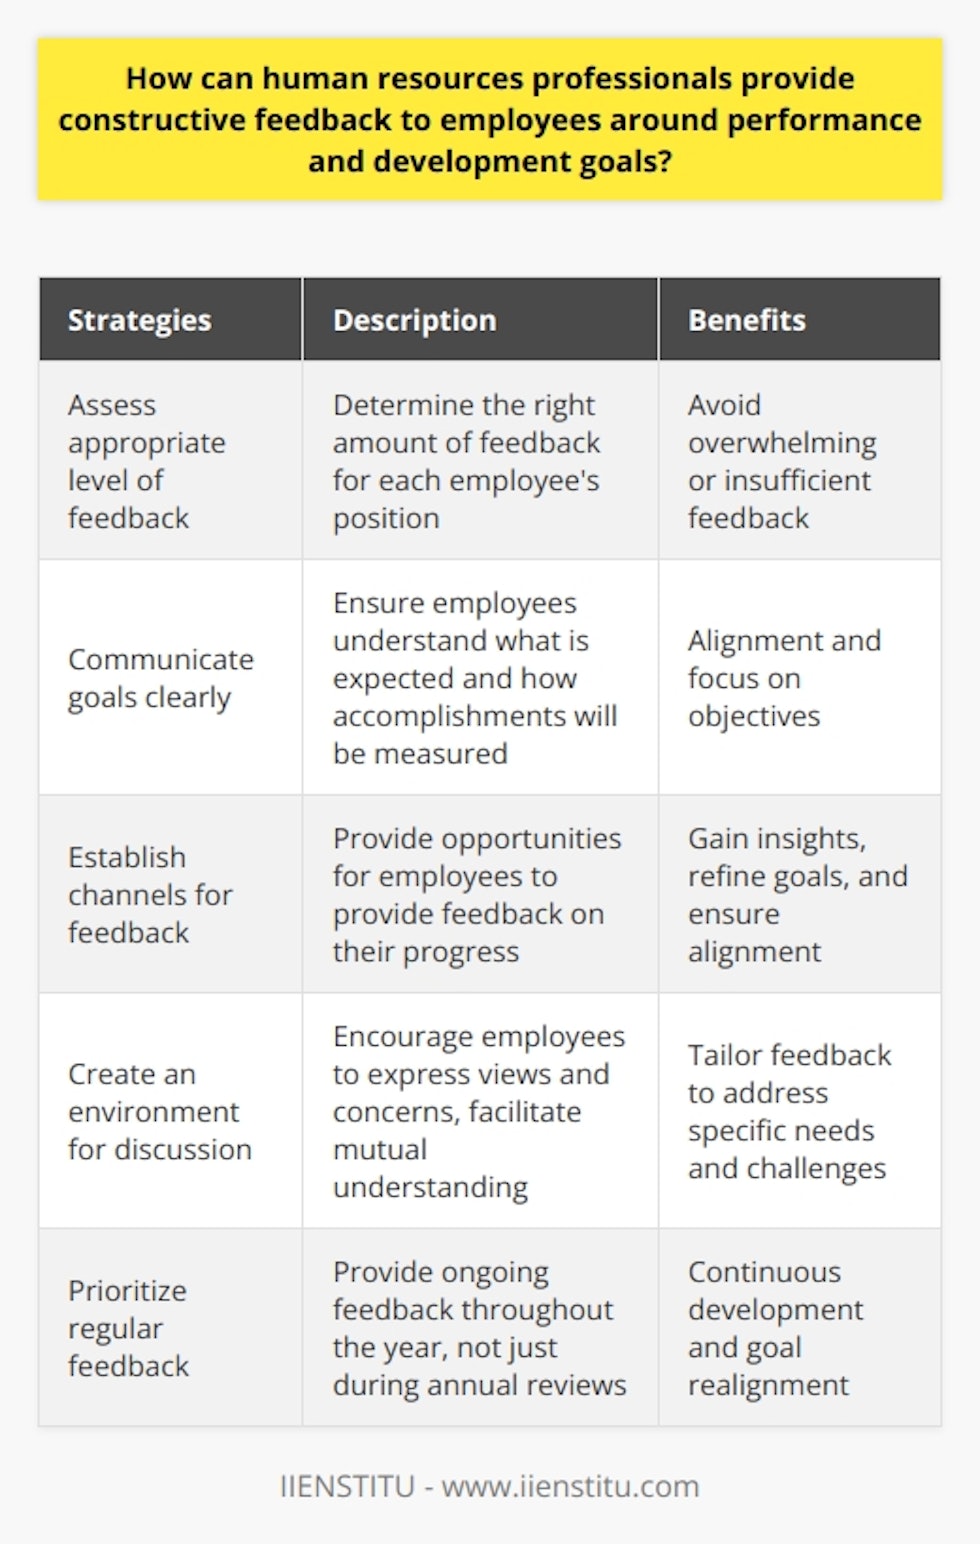 Human Resources professionals play a crucial role in any organization by providing constructive feedback to employees regarding their performance and development goals. By following these five strategies, HR professionals can effectively provide feedback that enables employees to reach their maximum potential.Firstly, it is important for HR professionals to assess the appropriate level of feedback that is suitable for each employee's position and aligns with organizational policies. Too much feedback may overwhelm employees, while too little feedback may deny them the necessary information to understand their performance and goals. Striking a balance is key.Secondly, HR professionals should communicate performance and development goals clearly and concisely. Employees need to know what is expected of them and how their accomplishments will be measured. Transparent communication ensures that both parties are on the same page and helps employees to focus on their objectives.Next, HR professionals should establish channels for employees to provide feedback on their progress towards their goals. This can be achieved by conducting regular check-ins or implementing an anonymous feedback system. By soliciting employees' perceptions, HR professionals gain valuable insights and can work collaboratively with employees to refine their goals and ensure alignment.When providing feedback, HR professionals should create an environment that fosters discussion and refinement. It is important to allow employees to express their views and concerns, which can facilitate mutual understanding and enhance the effectiveness of the feedback. By engaging in open dialogue, HR professionals can tailor the feedback to address specific needs and challenges.Lastly, HR professionals must prioritize regular feedback to ensure ongoing development and goal attainment for employees. Feedback should not be limited to annual performance reviews but should occur consistently throughout the year. Regular check-ins provide opportunities to recognize achievements, address issues, and realign goals as needed.To summarize, HR professionals should utilize these strategies to provide constructive feedback to employees on their performance and development goals. This approach ensures that employees are empowered to achieve short-term and long-term objectives while contributing to the overall success of the organization.